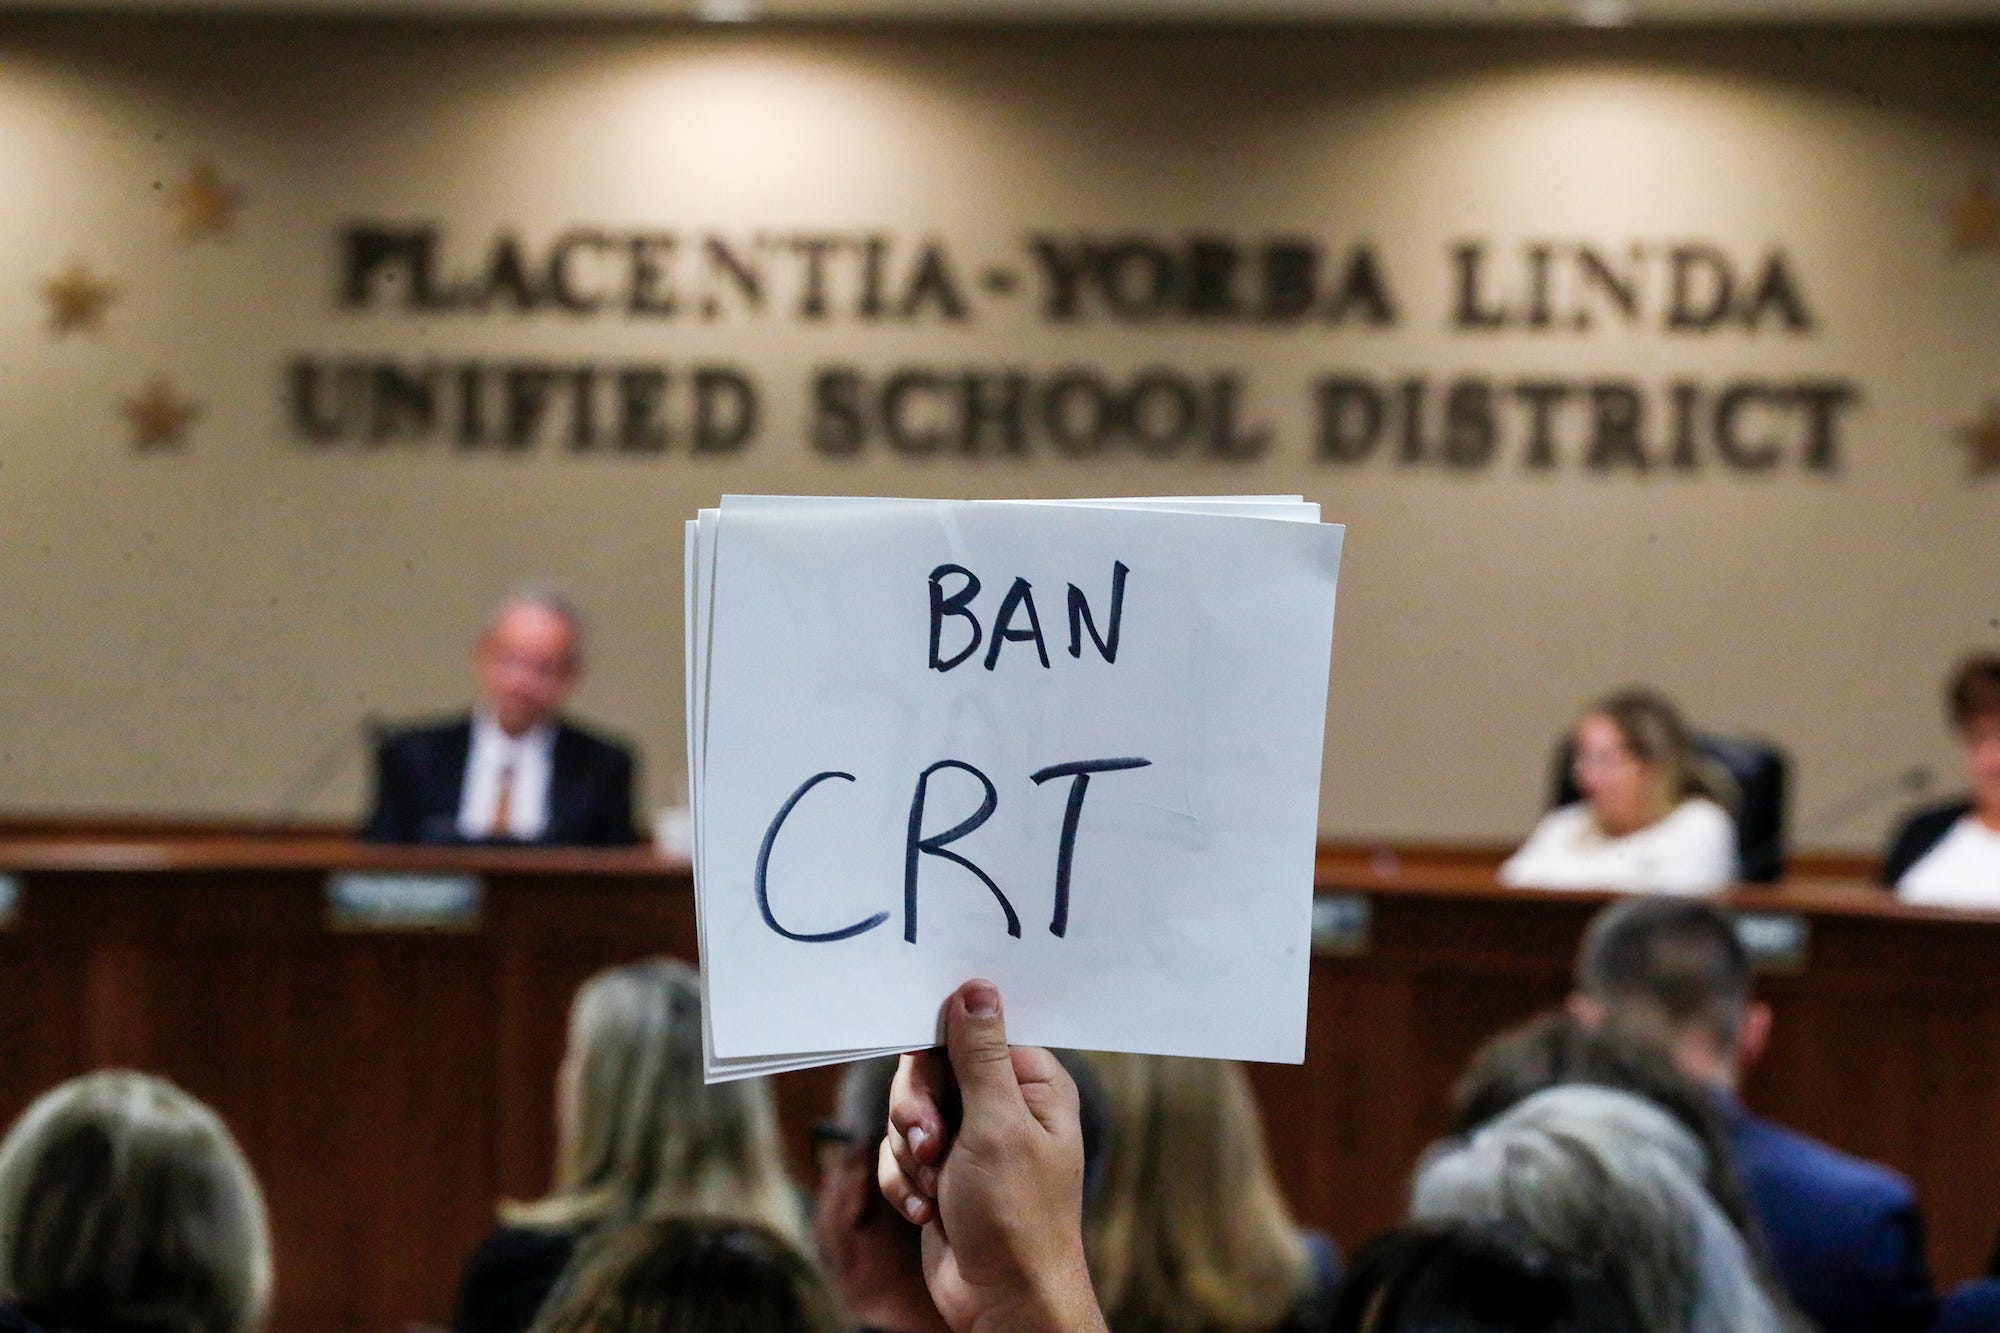 A person at a Placentia-Yorba Linda School Board meeting in California holds up a sign saying 'BAN CRT' in protest of teaching about critical race theory in schools.